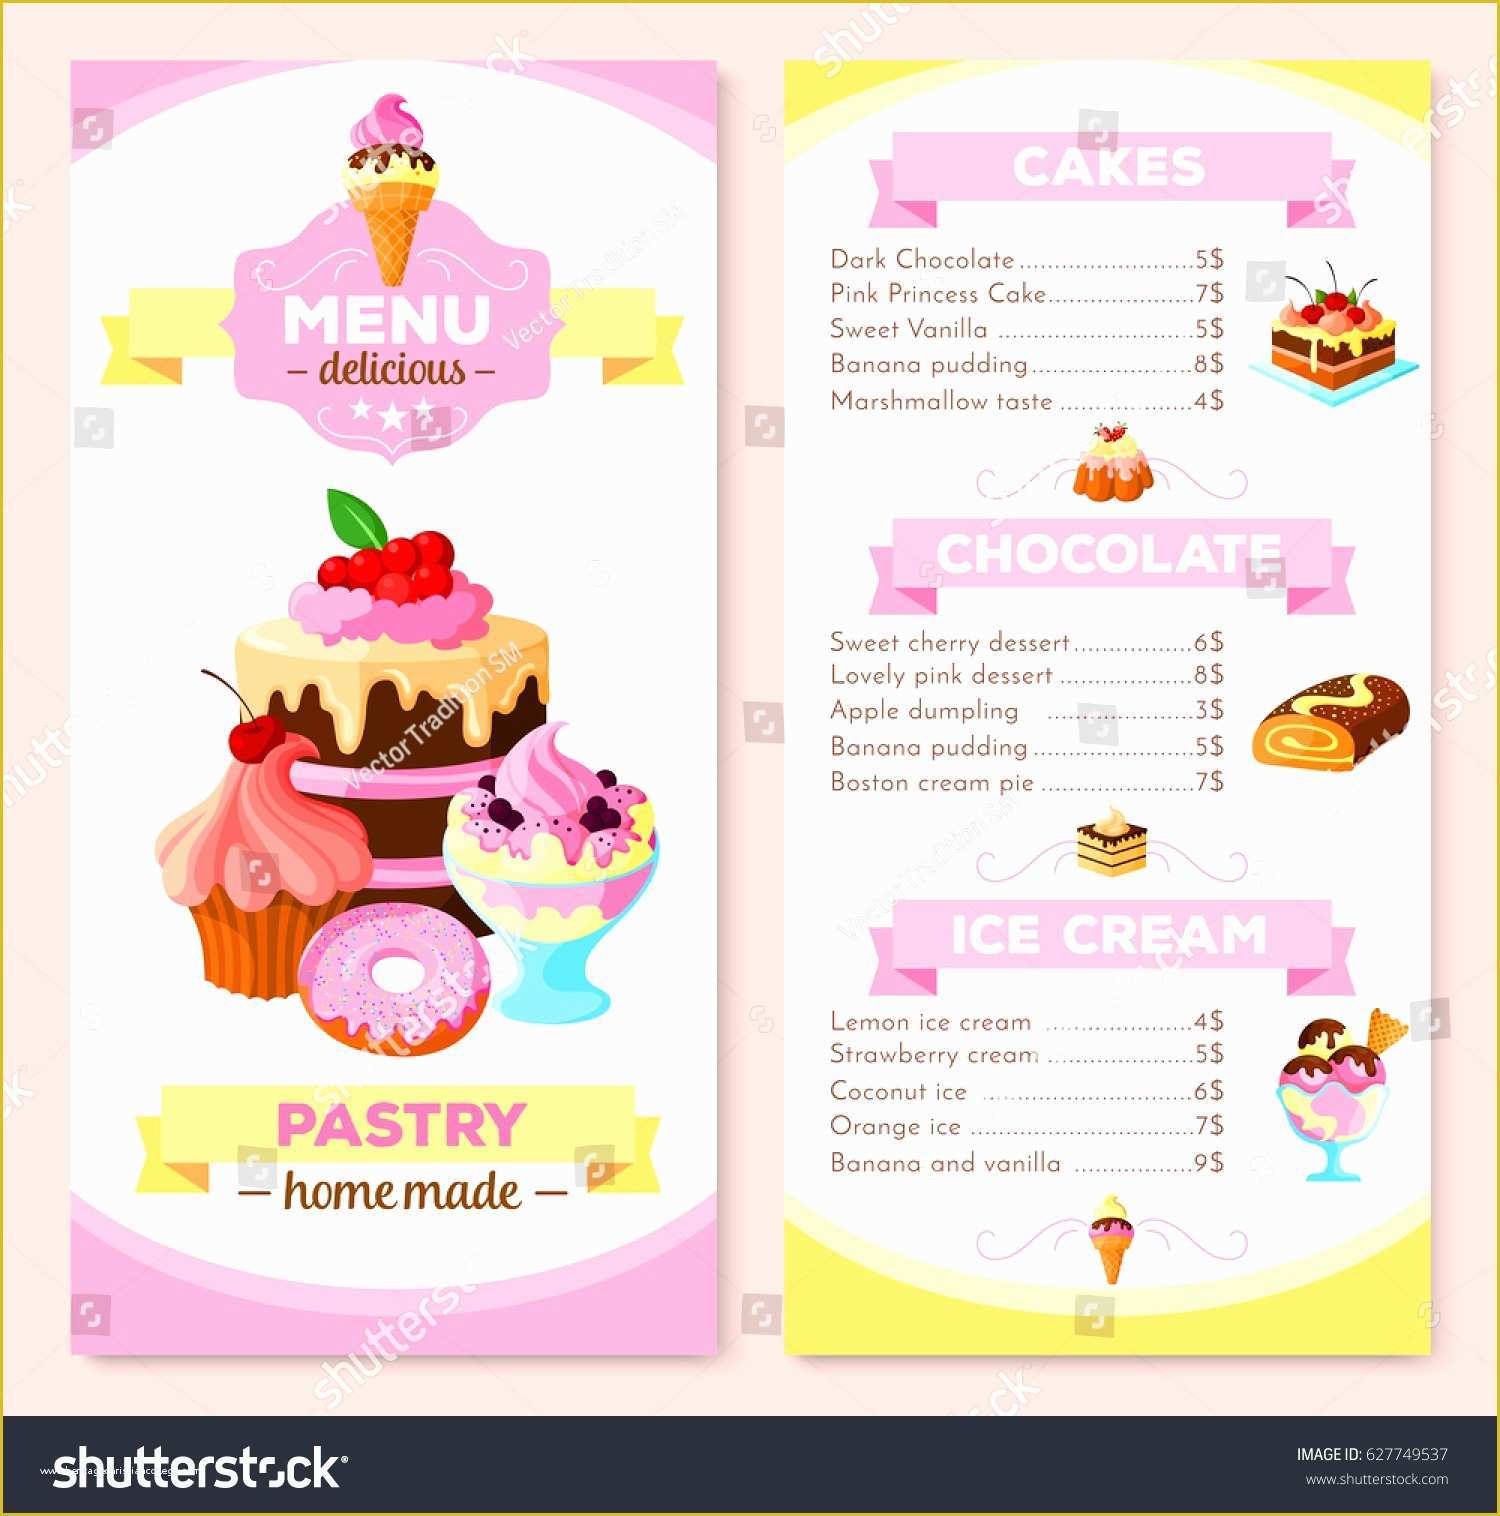 Cake Brochure Template Free Download Of 15 Elegant Cake Brochure Template Free Download